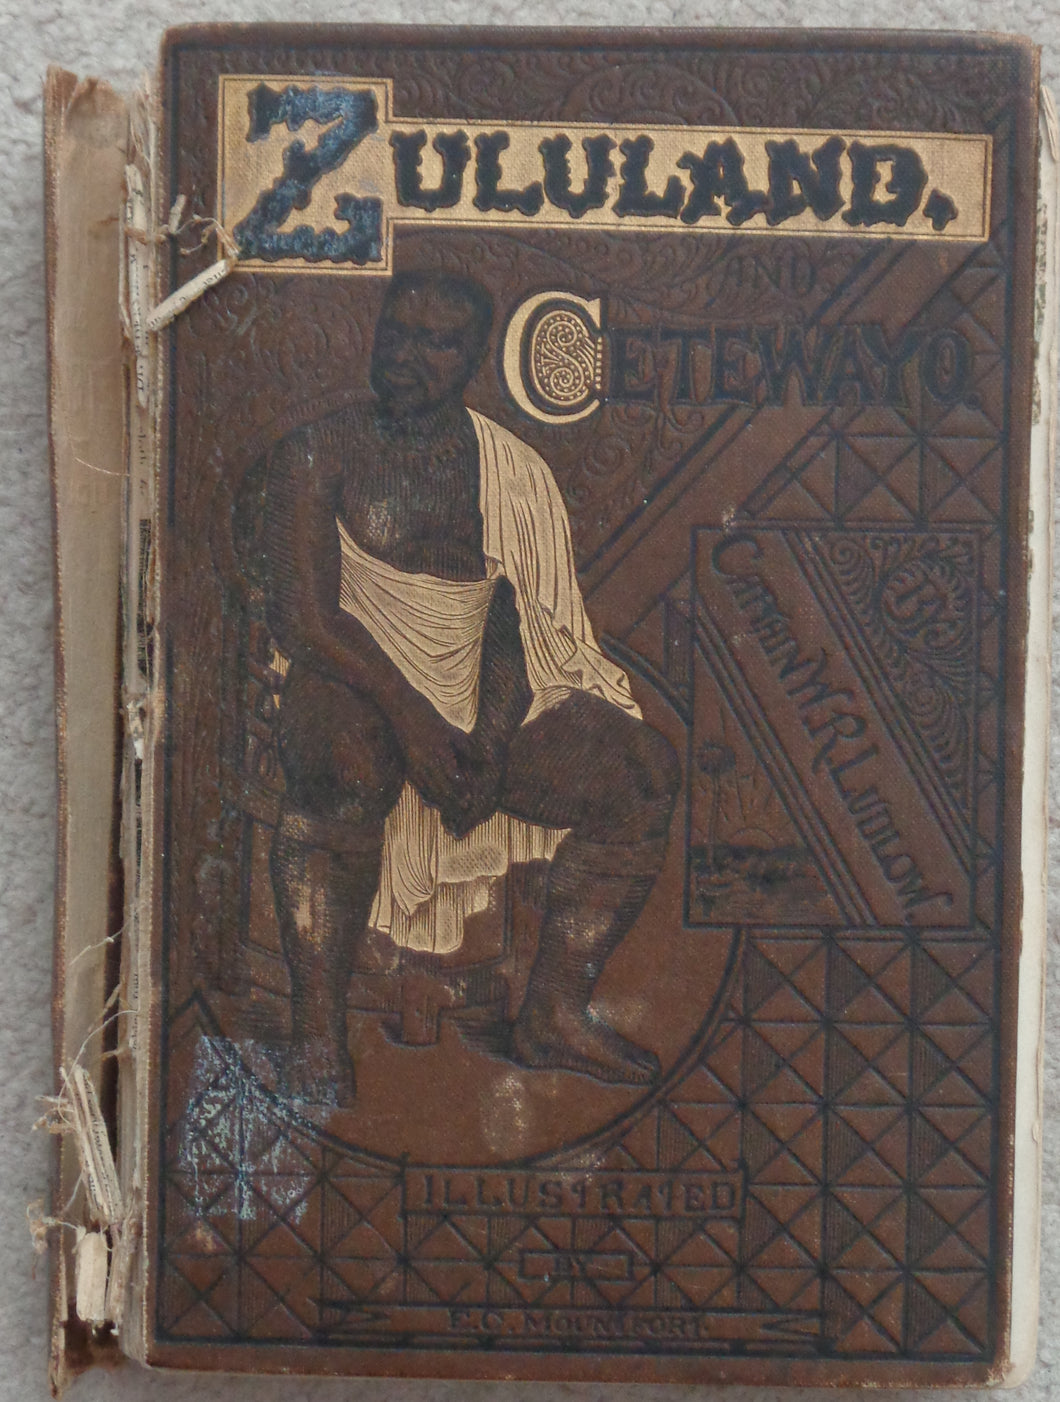 'ZULULAND AND CETYWAYO' by W. G. Ludlow